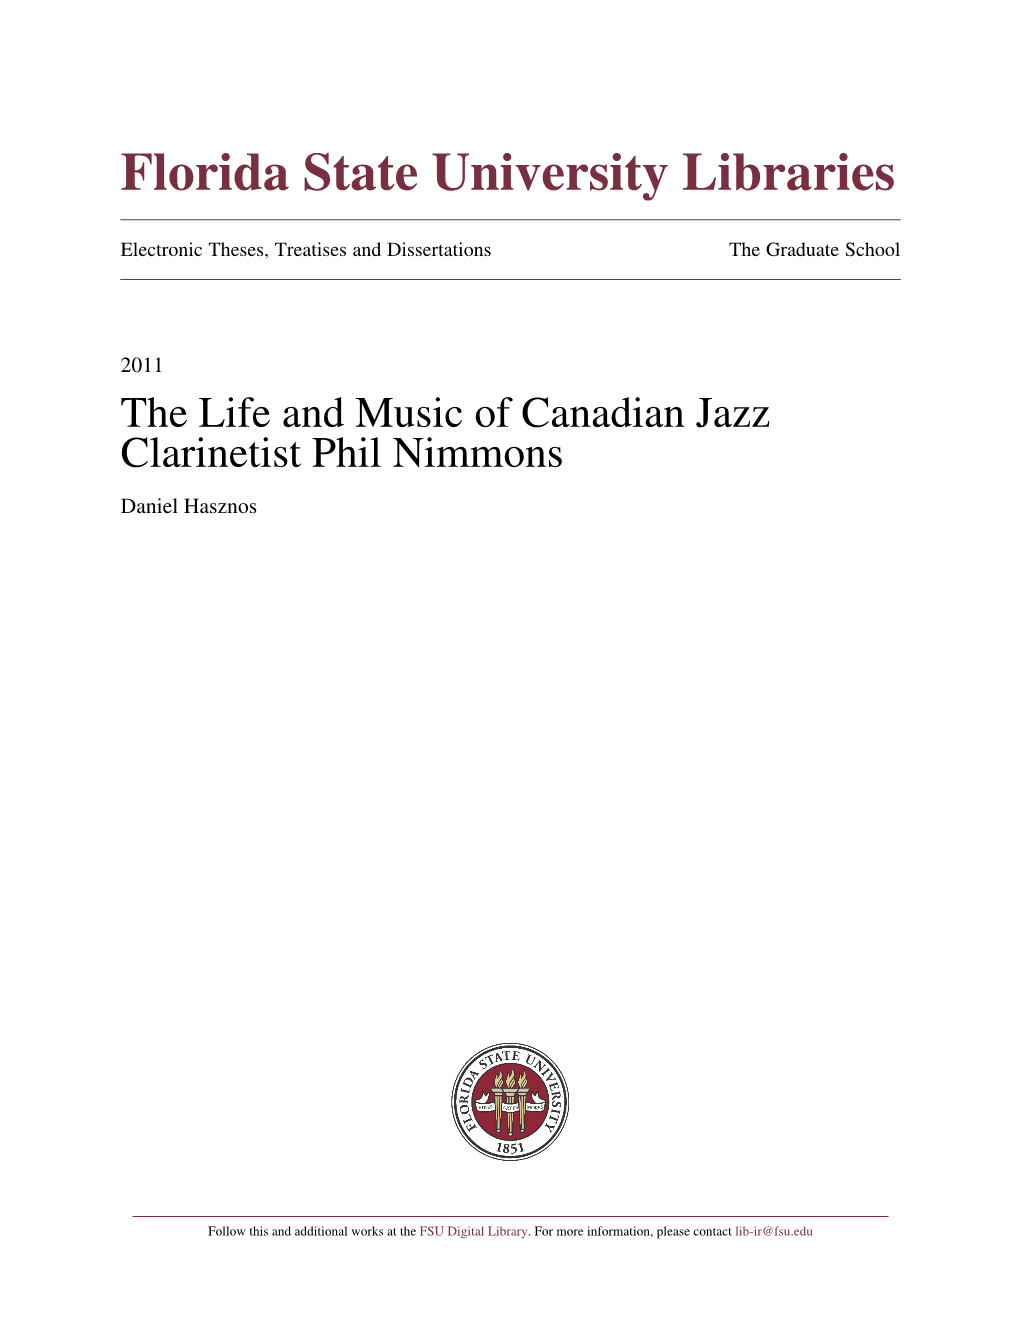 The Life and Music of Canadian Jazz Clarinetist Phil Nimmons Daniel Hasznos